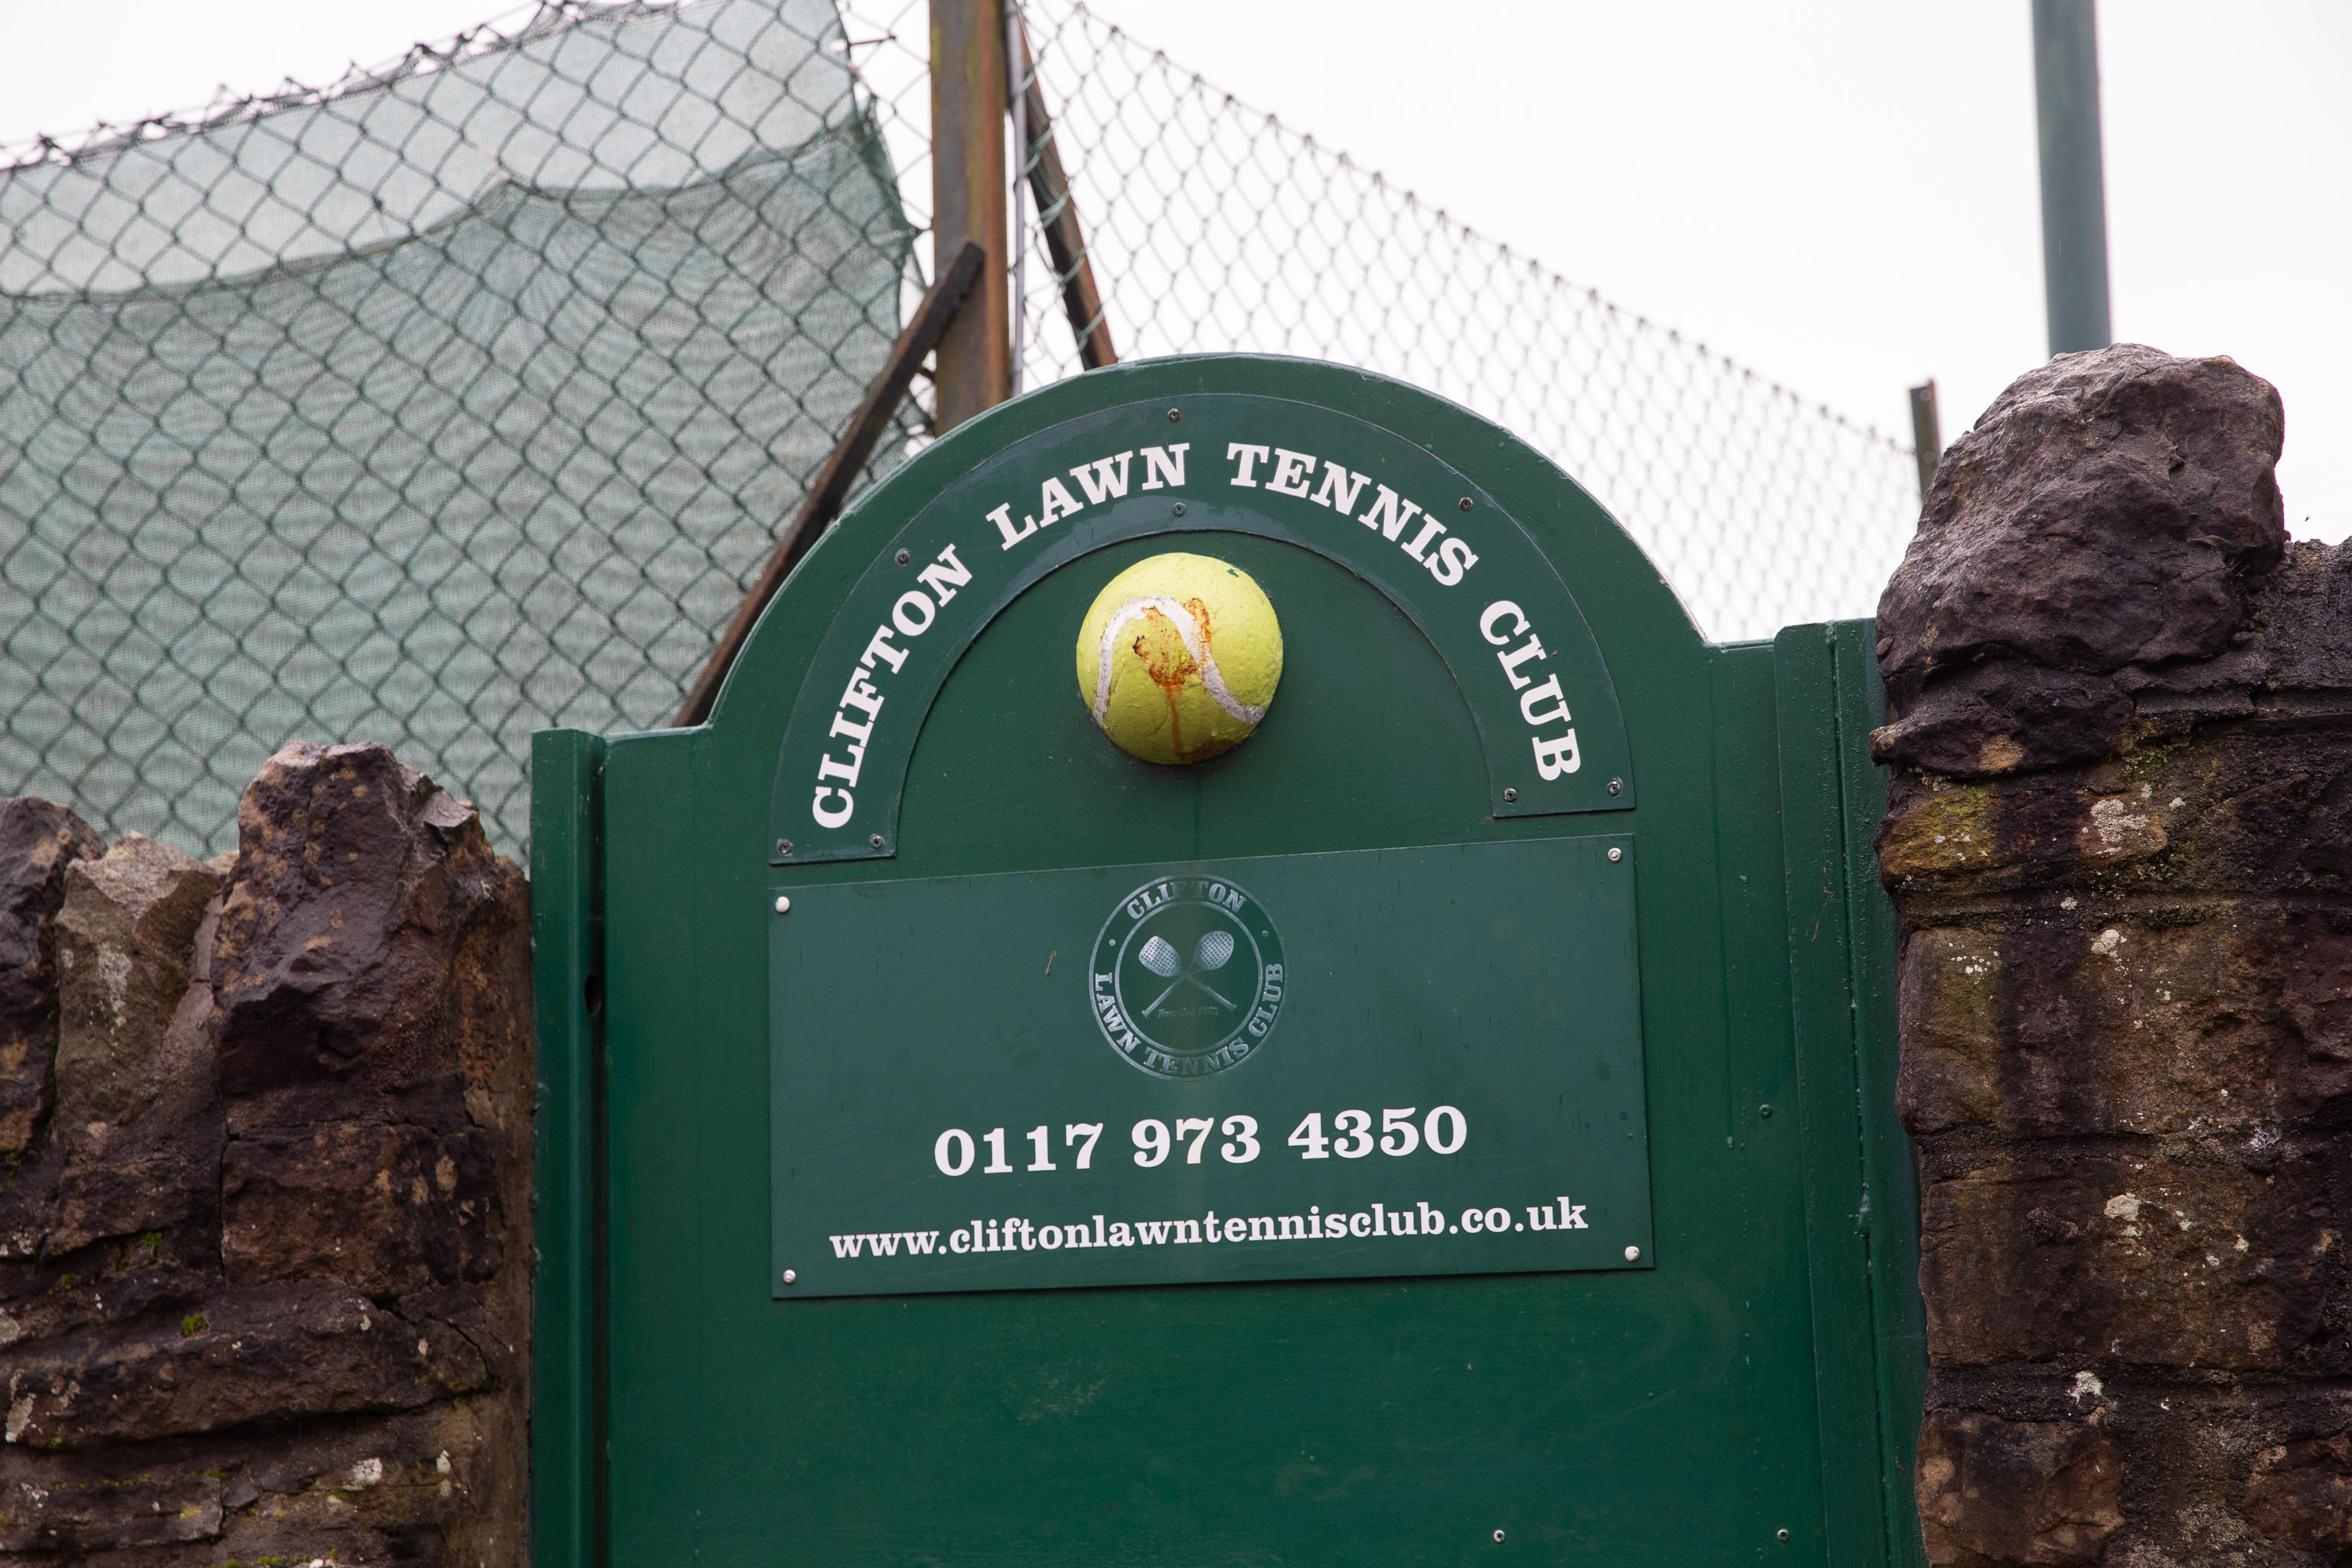 Clifton Lawn Tennis Club Door
Not sure about the what-looks-like-blood on the ball.
